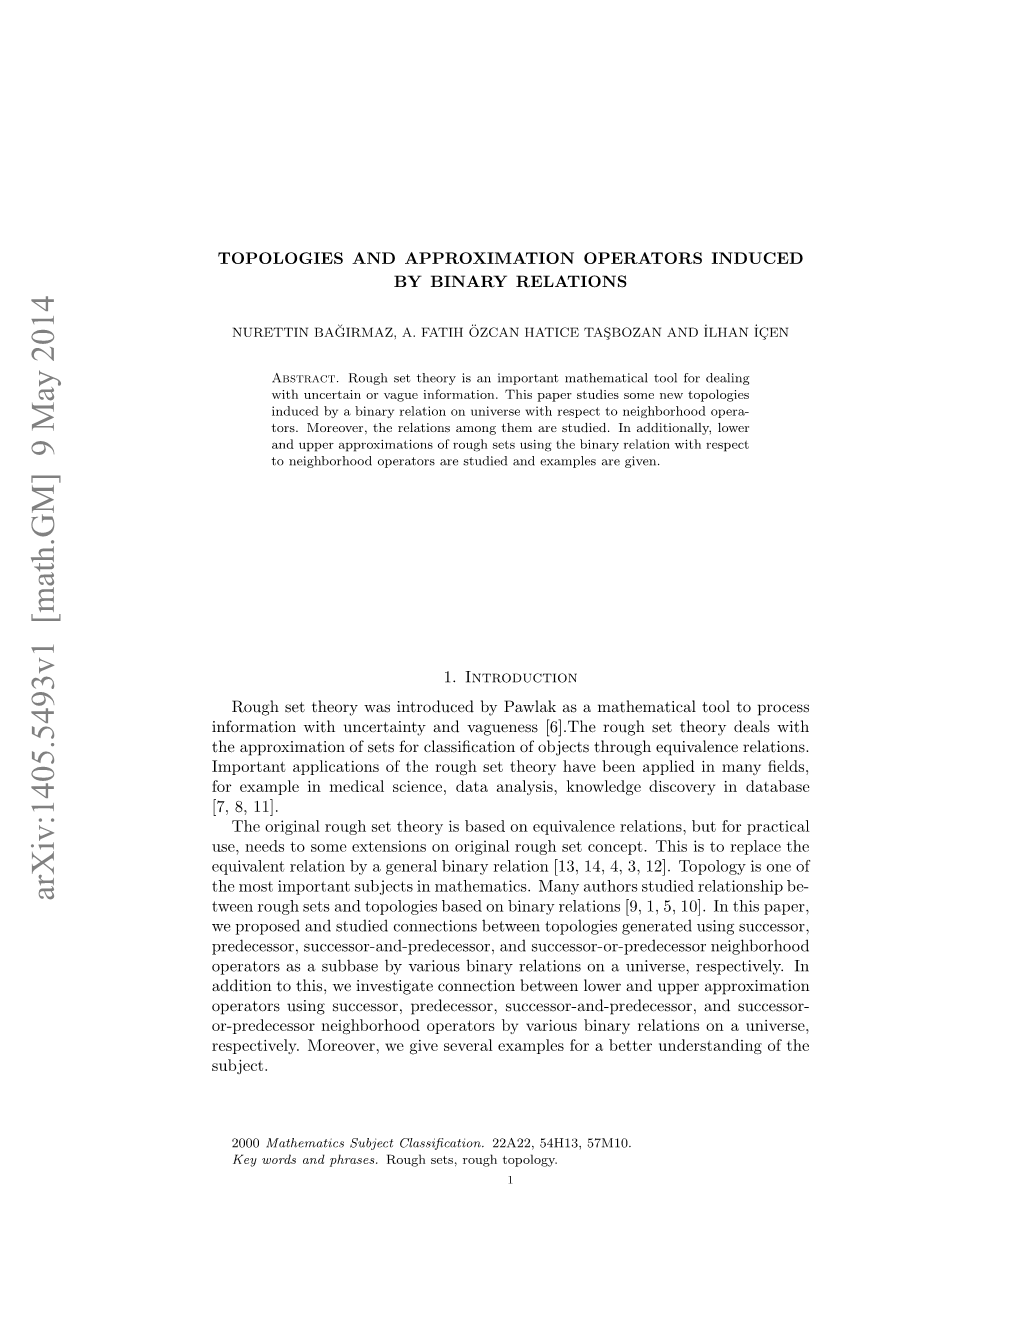 Topologies and Approximation Operators Induced by Binary Relations3